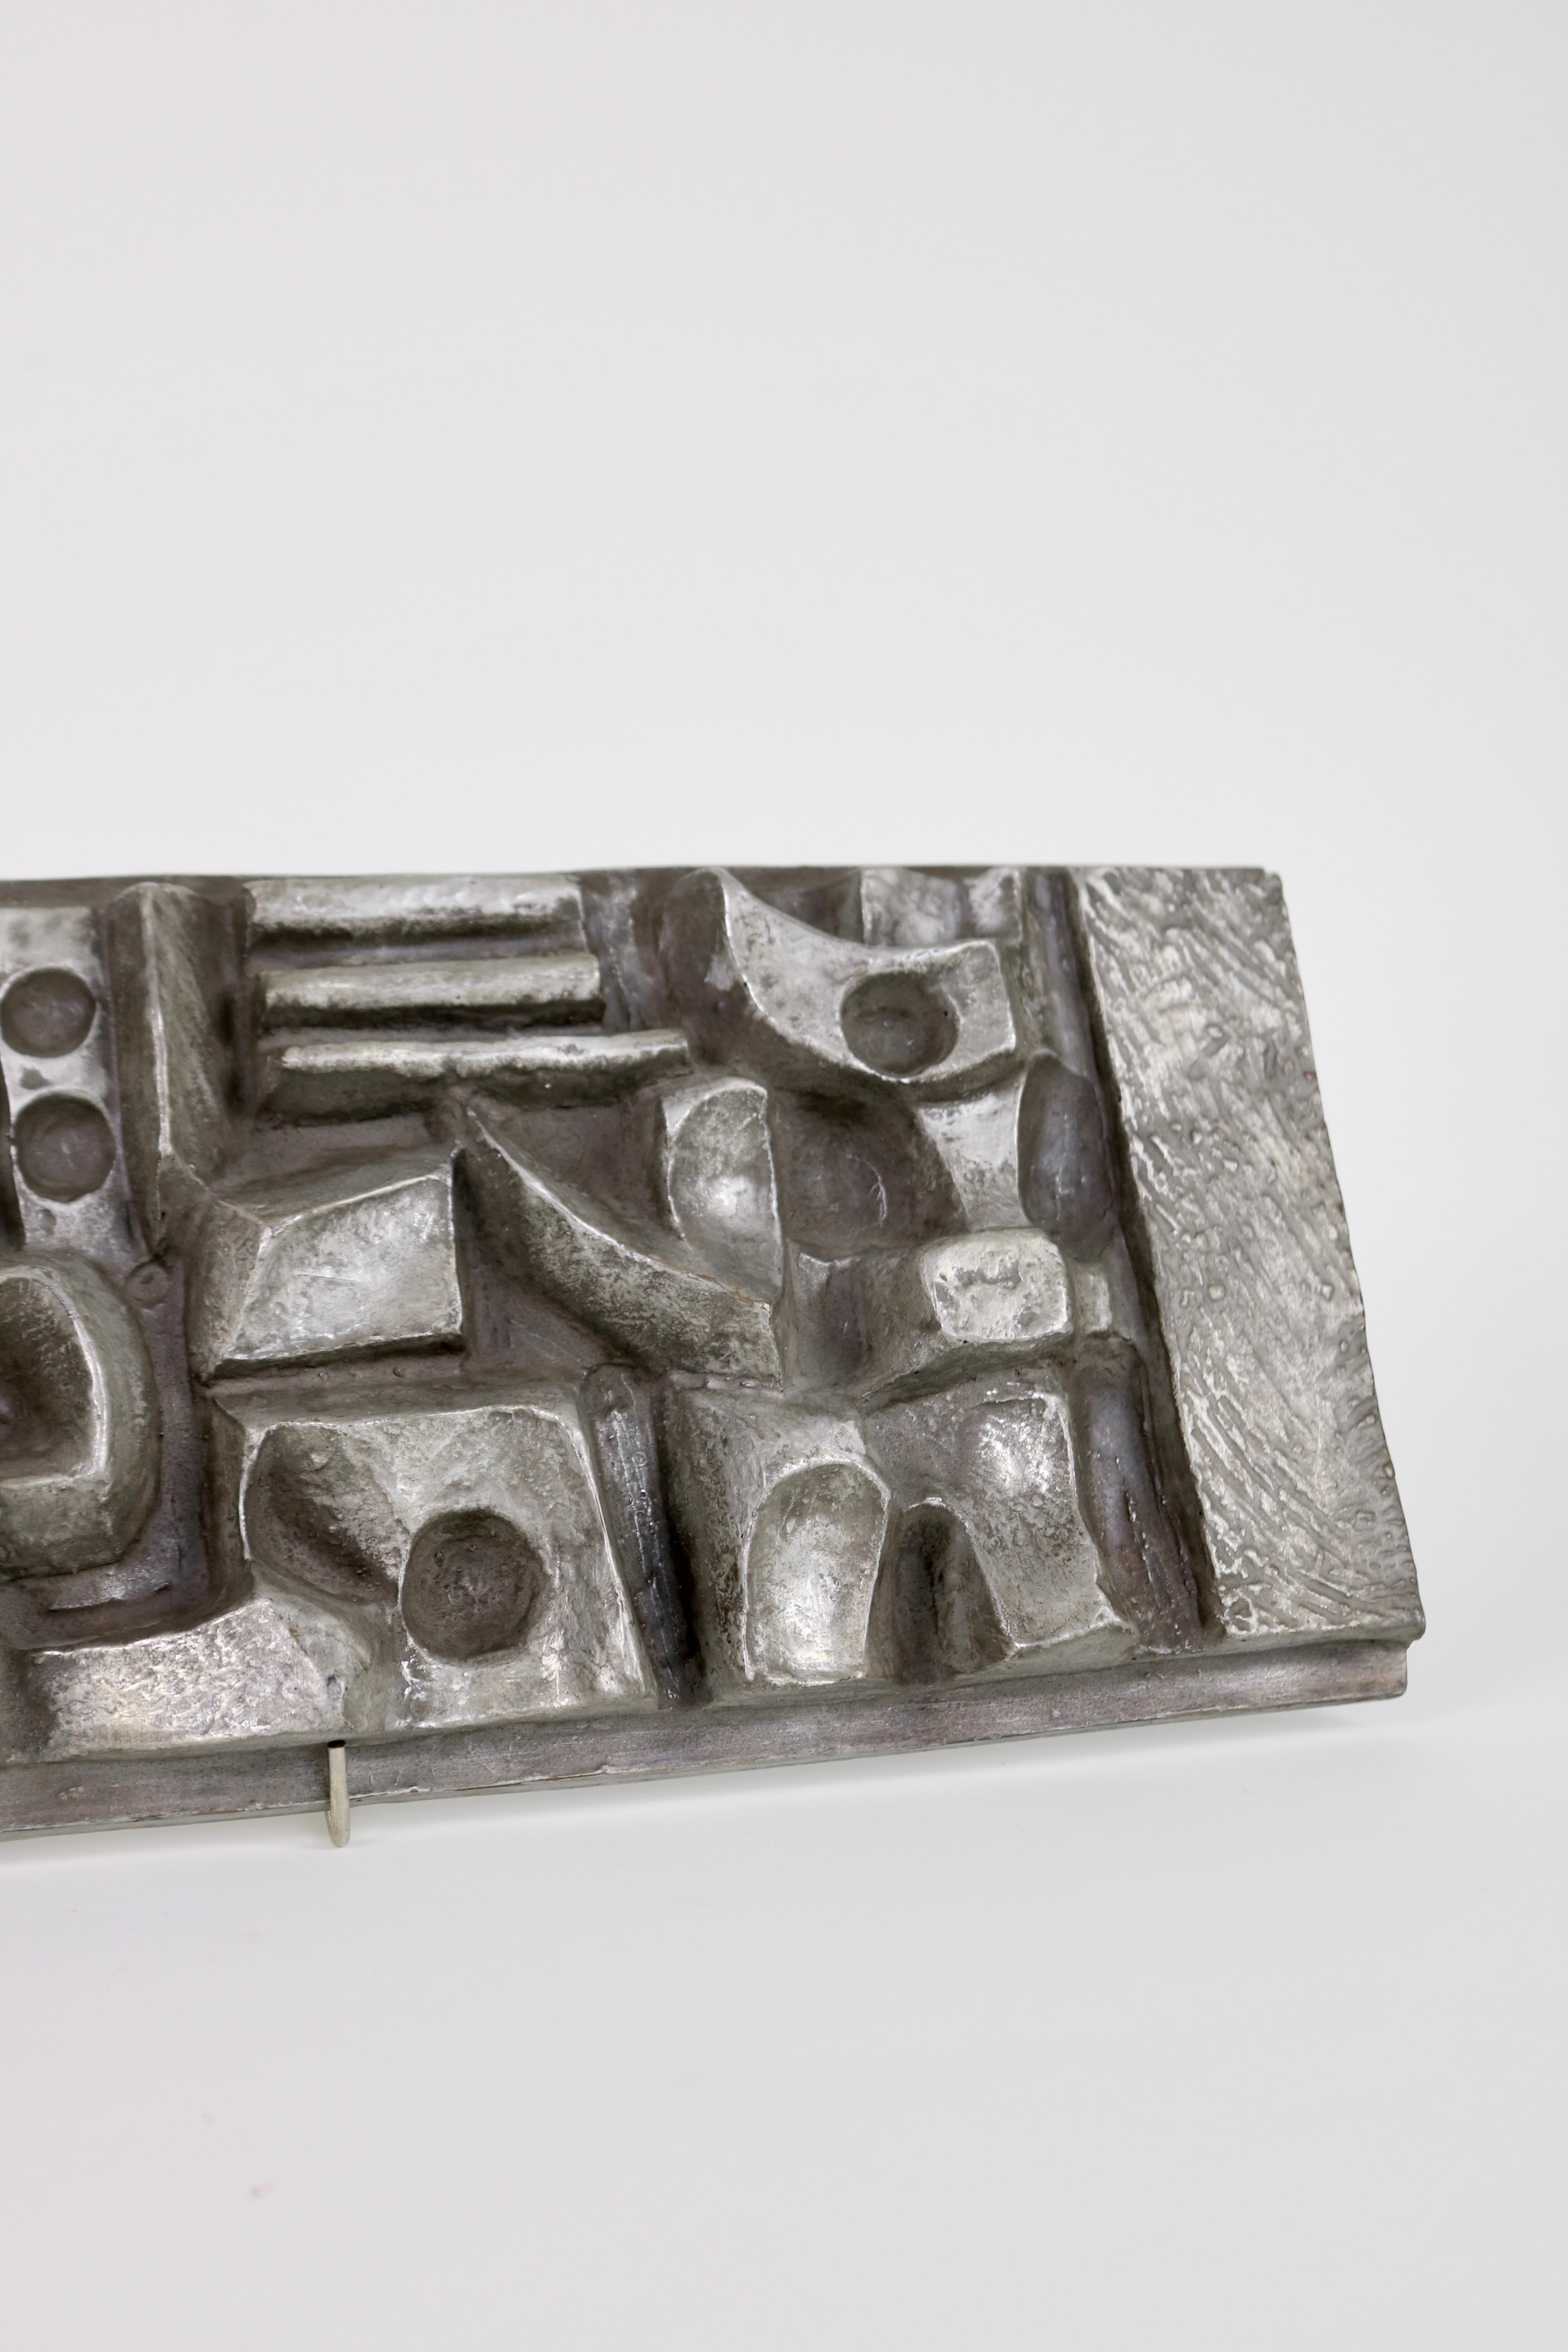 An abstract relief cast by Alfred Russ in 1974. Russ was a German artist exhibiting with the Bayreuth artist circle in the 50s.

This wall piece is a lightweight cast and has hooks for hanging.